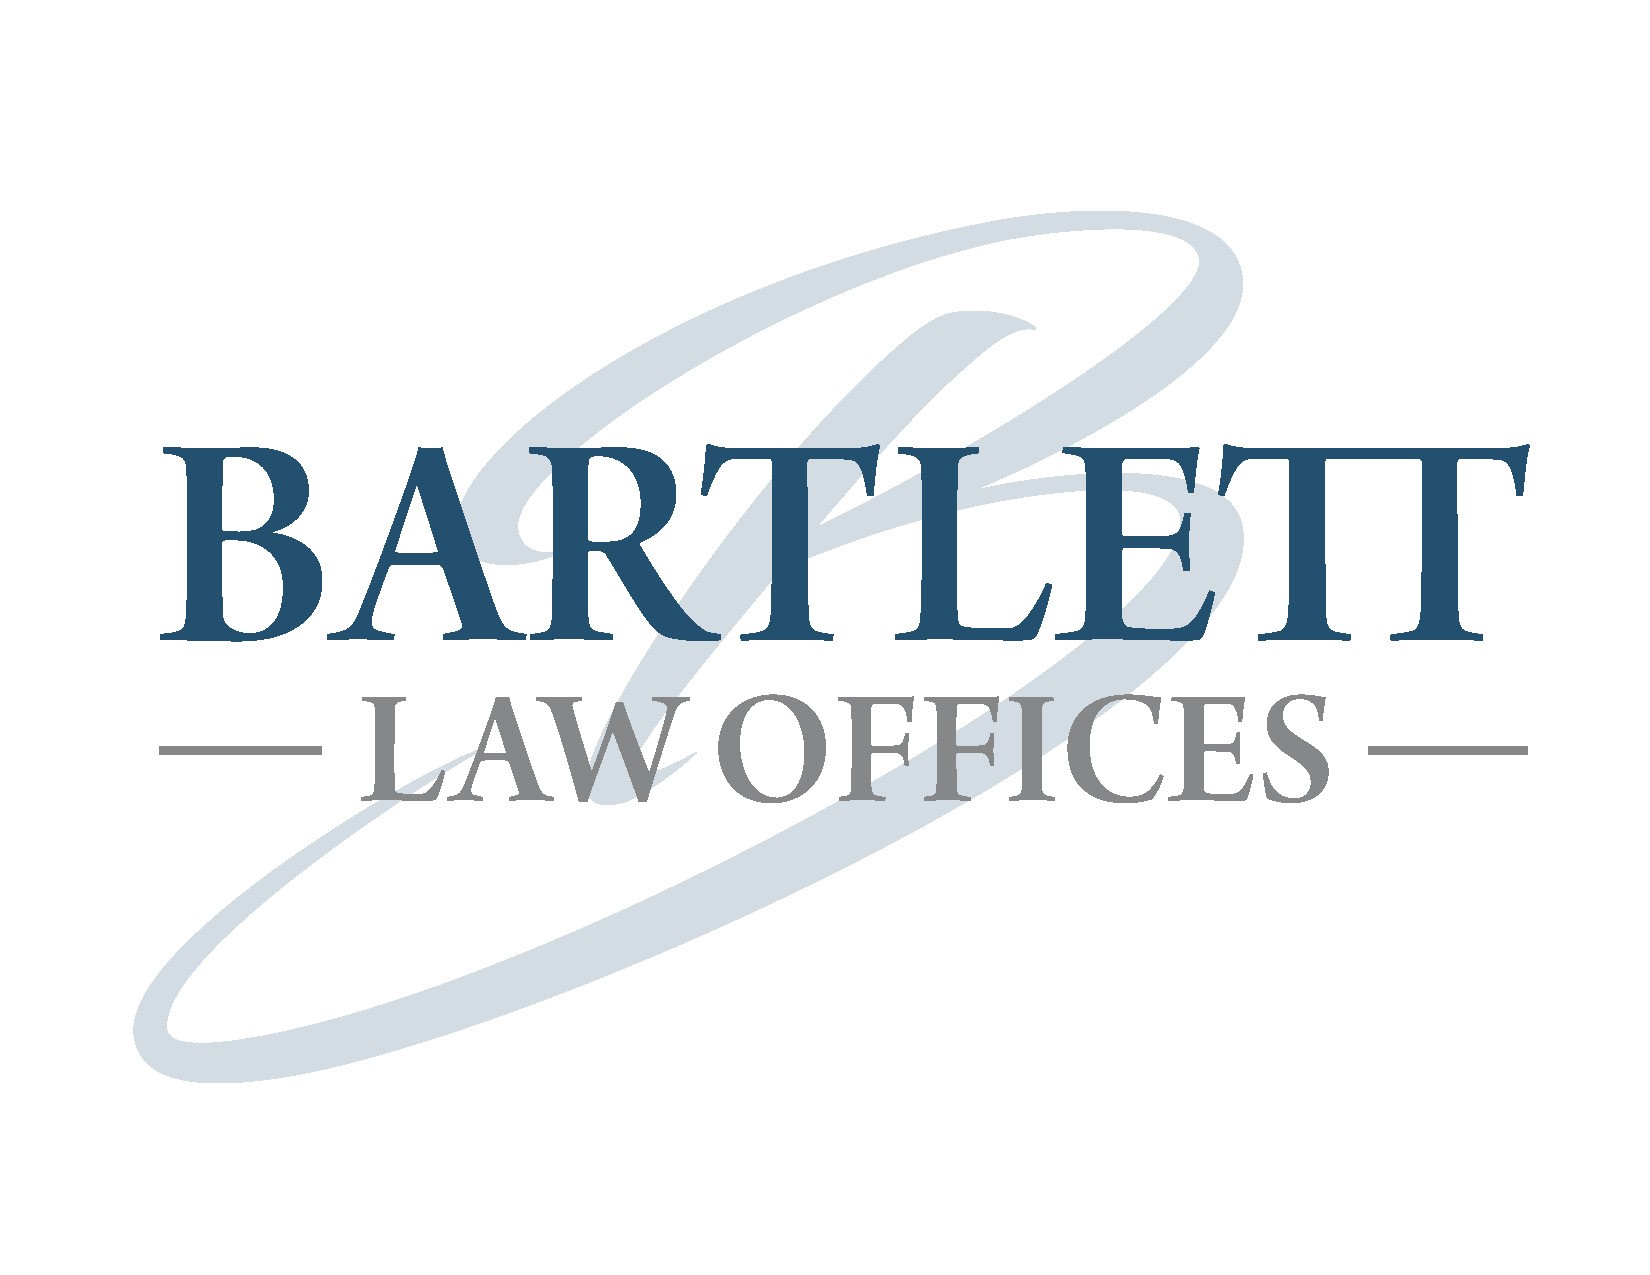 Bartlett Law Offices